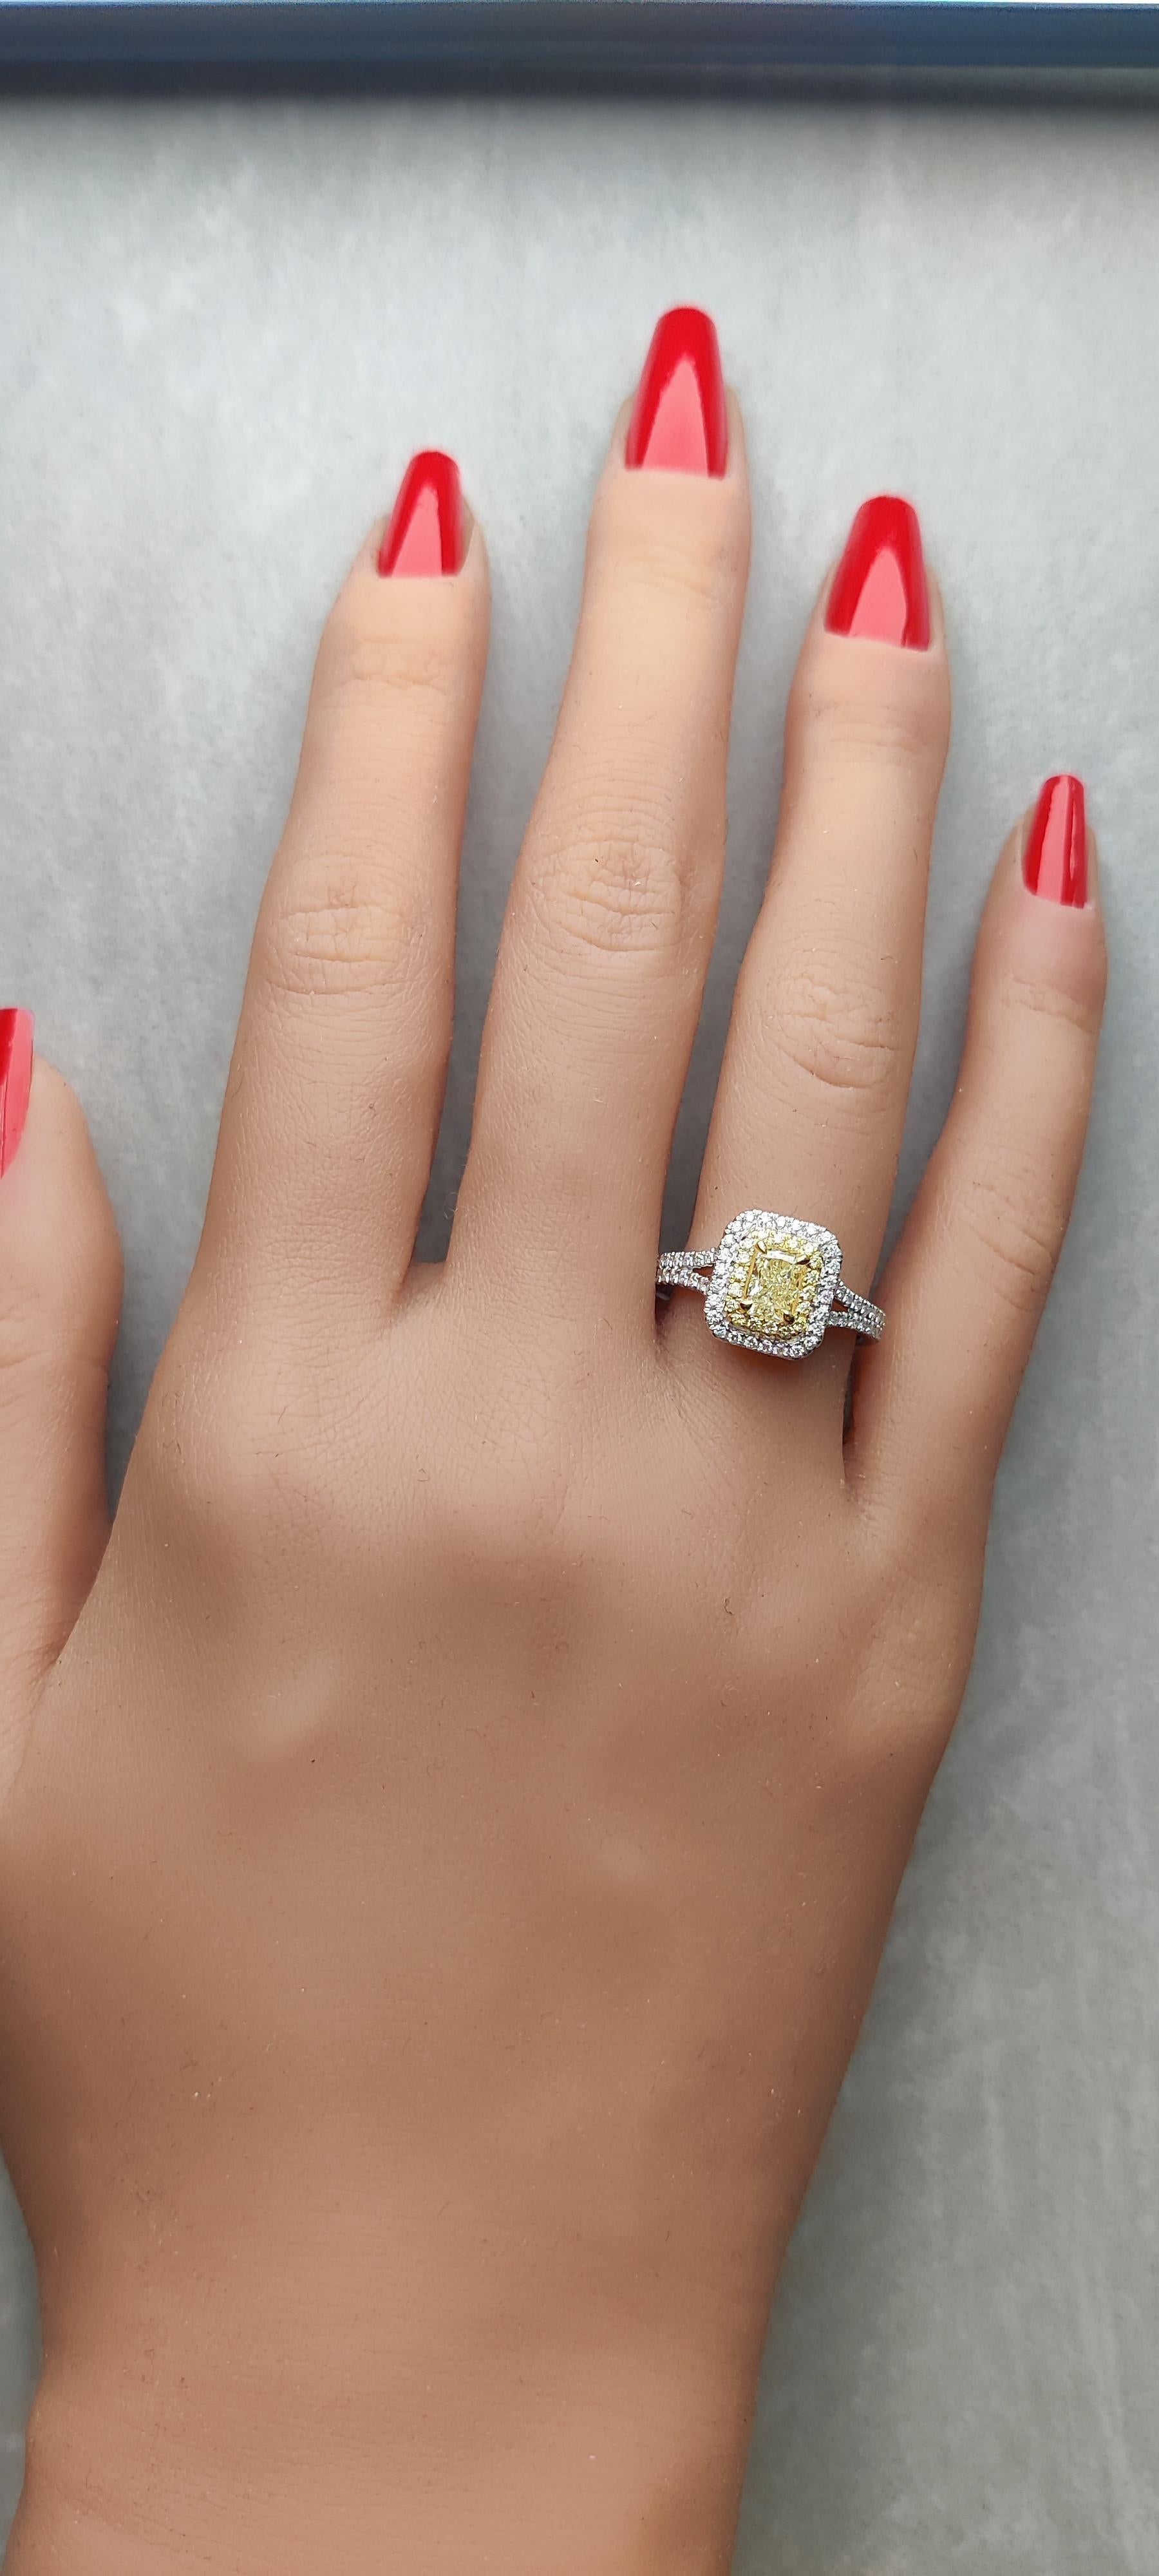 RareGemWorld's classic GIA certified diamond ring. Mounted in a beautiful 18K Yellow and White Gold setting with a natural radiant cut yellow diamond. The yellow diamond is surrounded by round natural yellow diamond melee and round natural white